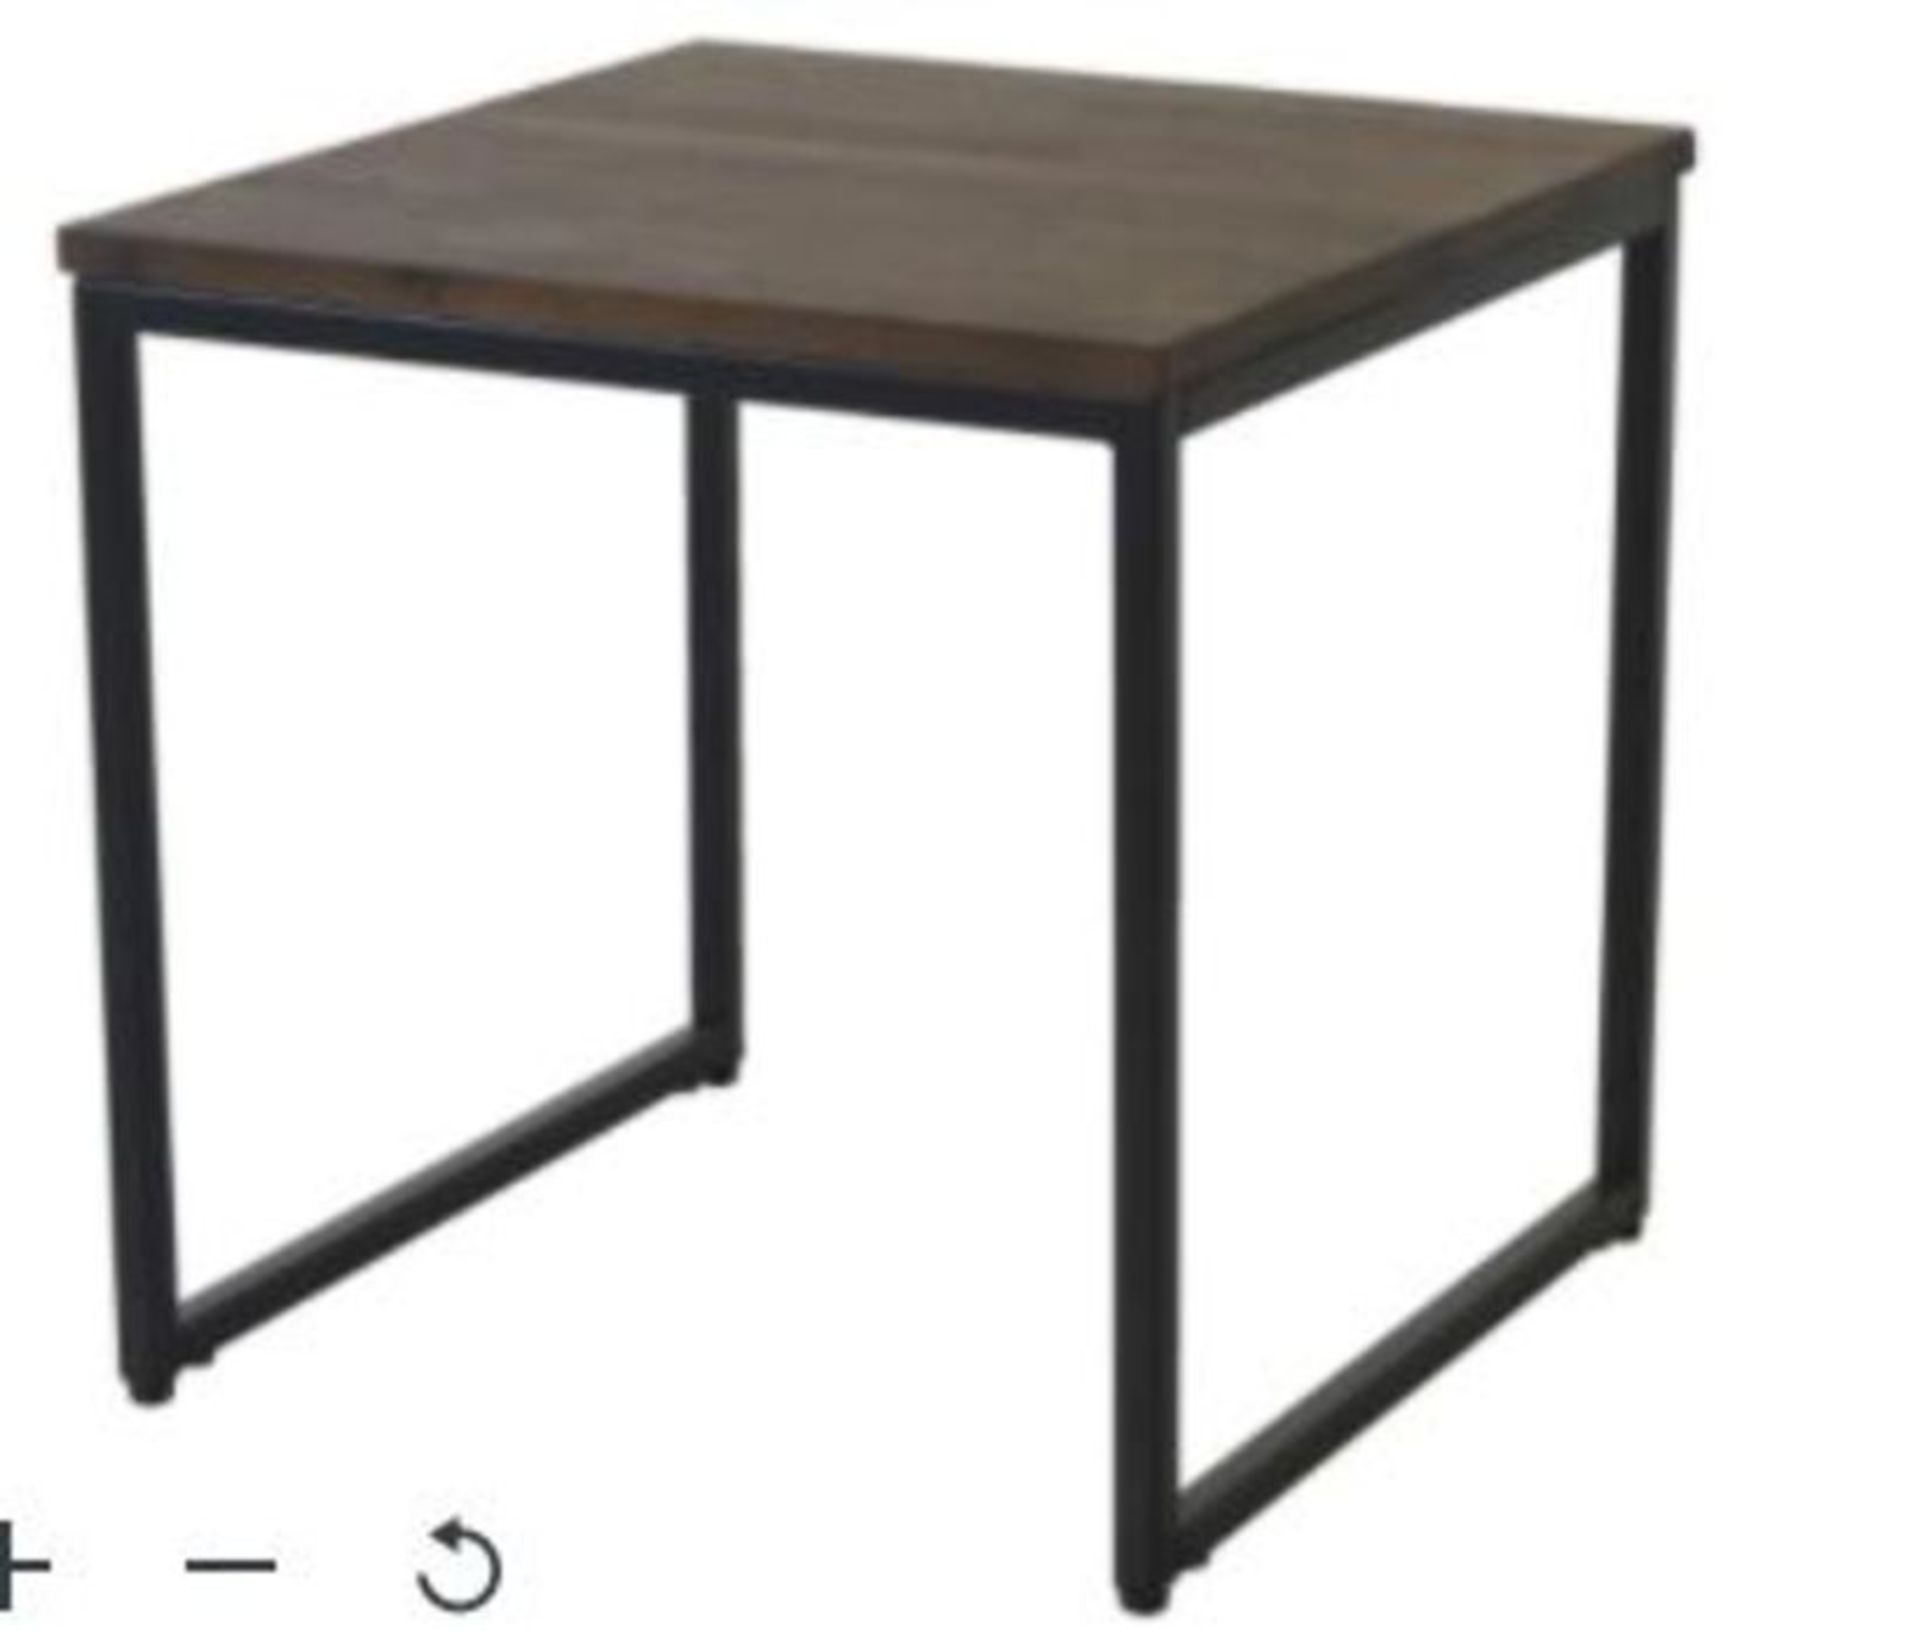 1 X ATICO DARK STAINED WOOD EFFECT SIDE TABLE (H)40CM (W)40CM / RRP £18.00